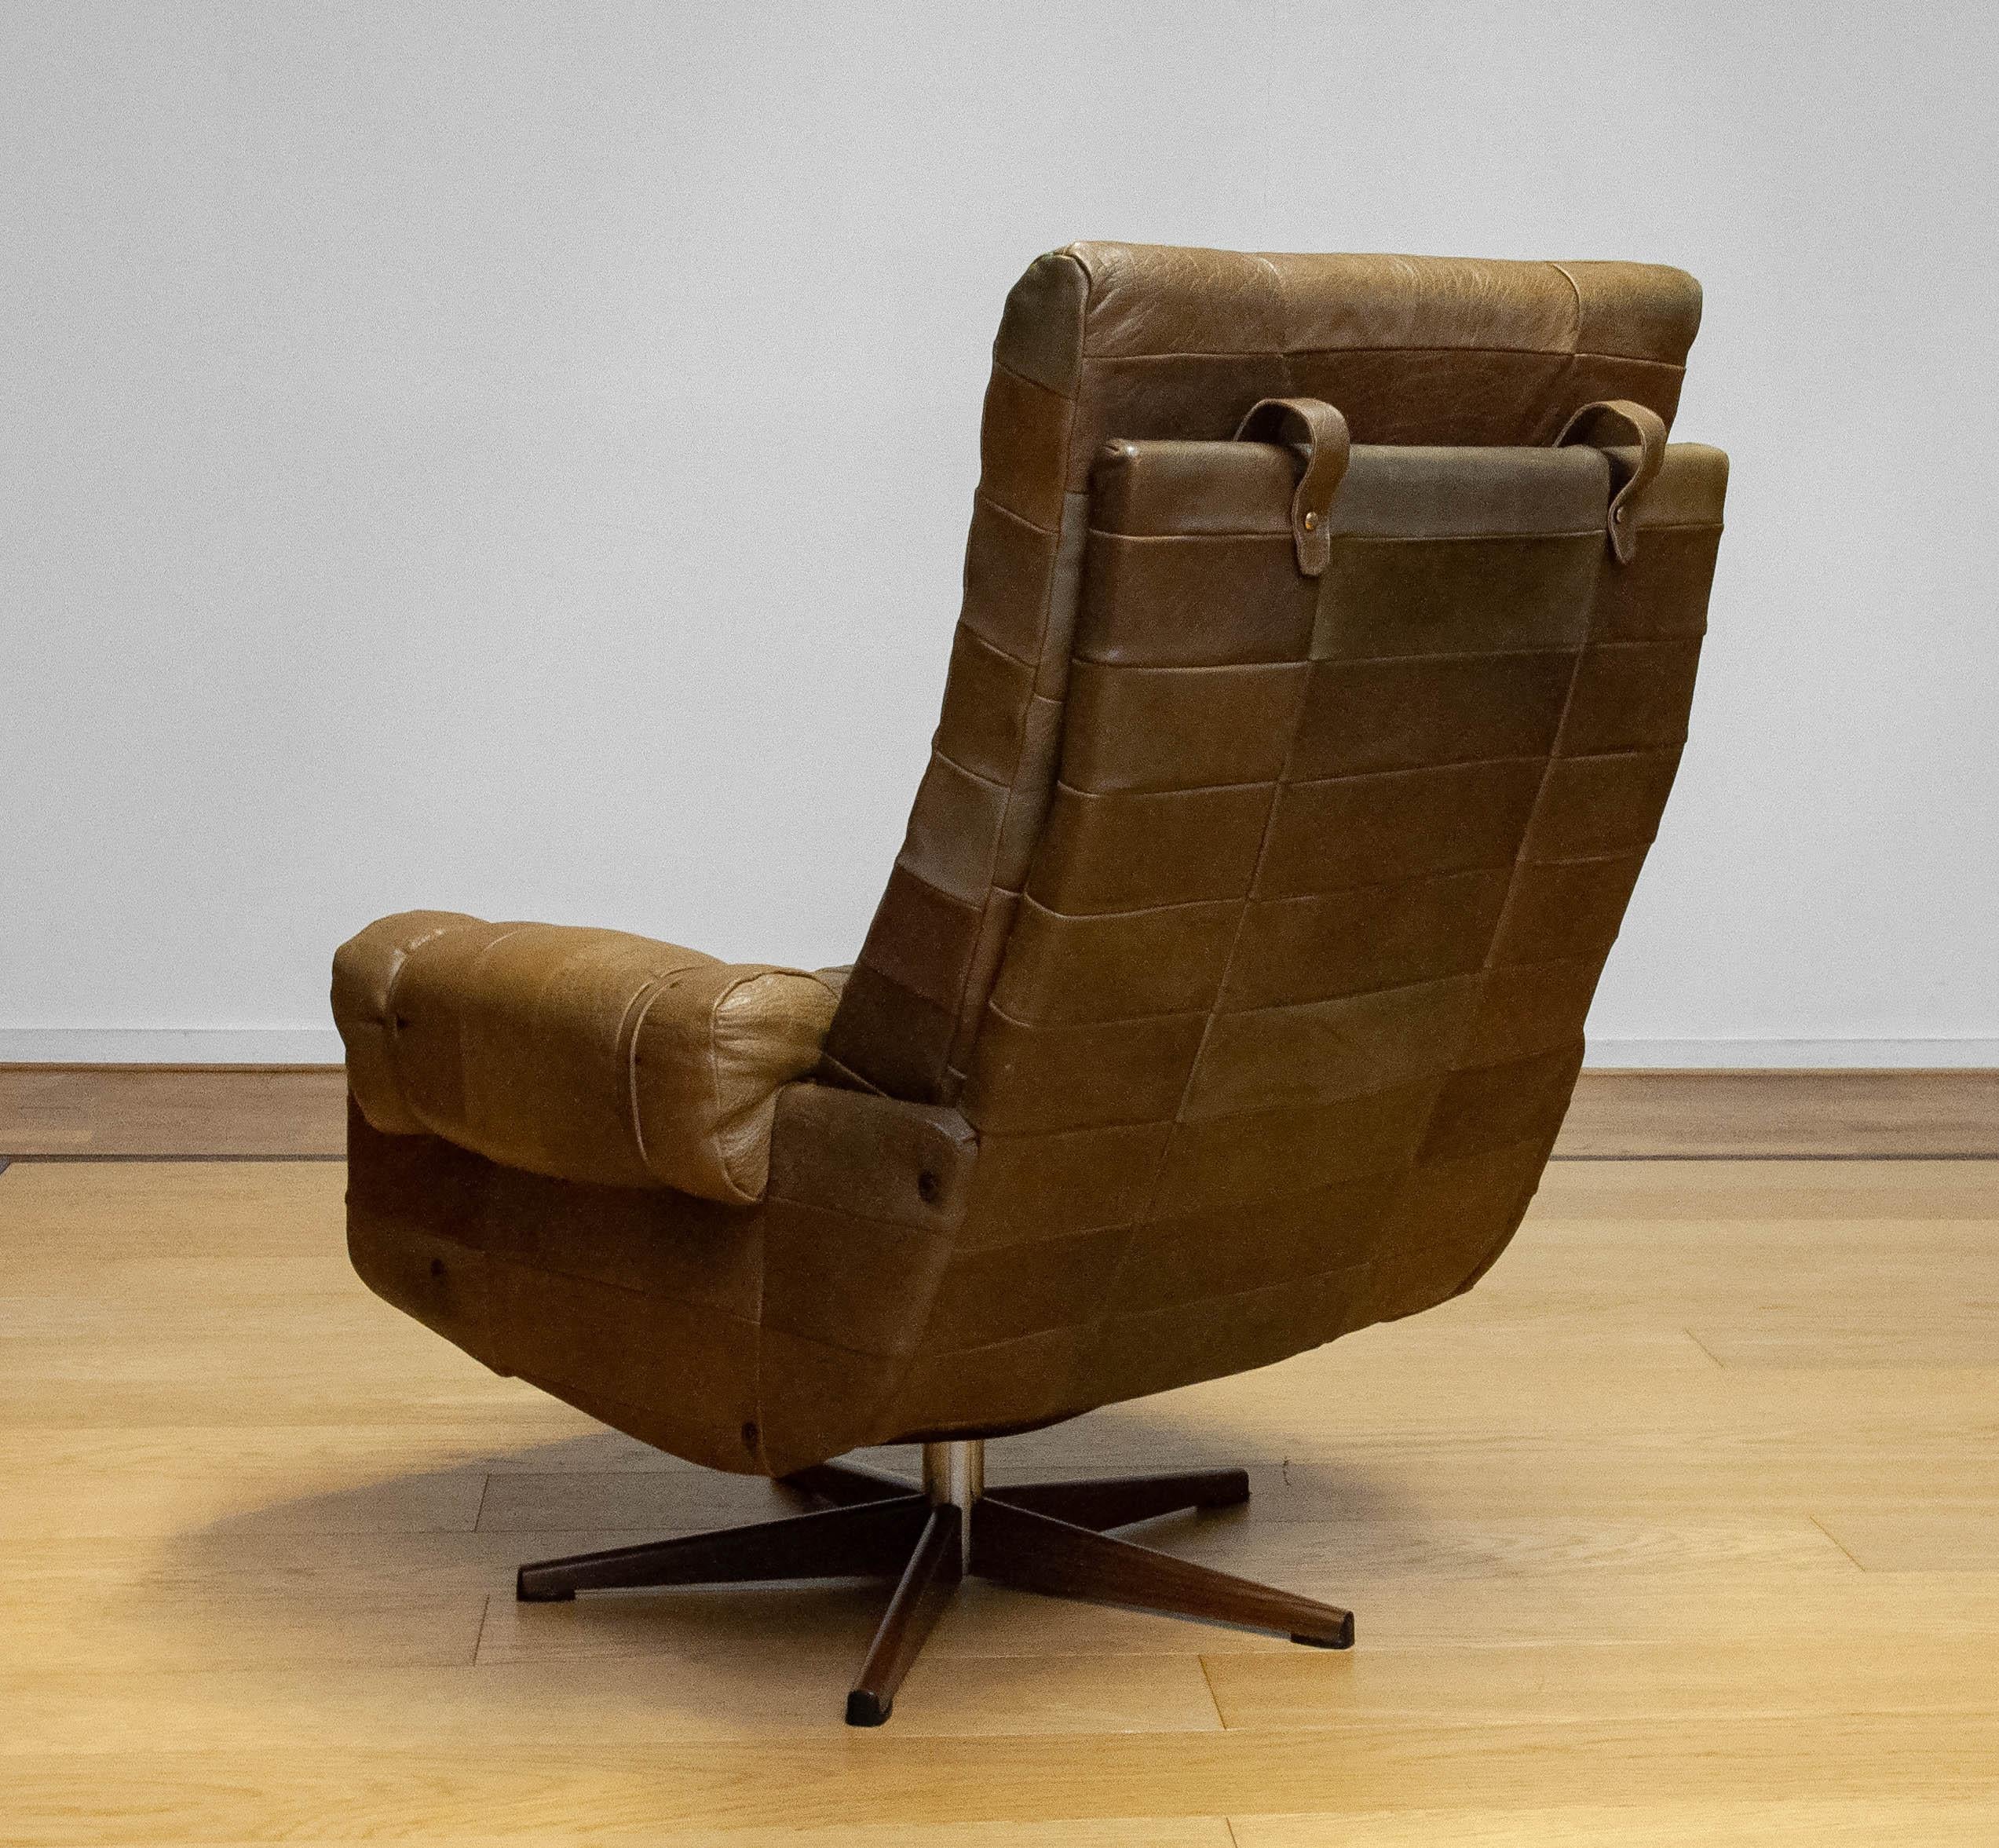 70s Swivel Chair By Arne Norell Möbel AB In Sturdy Olive Green Patchwork Leather In Good Condition For Sale In Silvolde, Gelderland